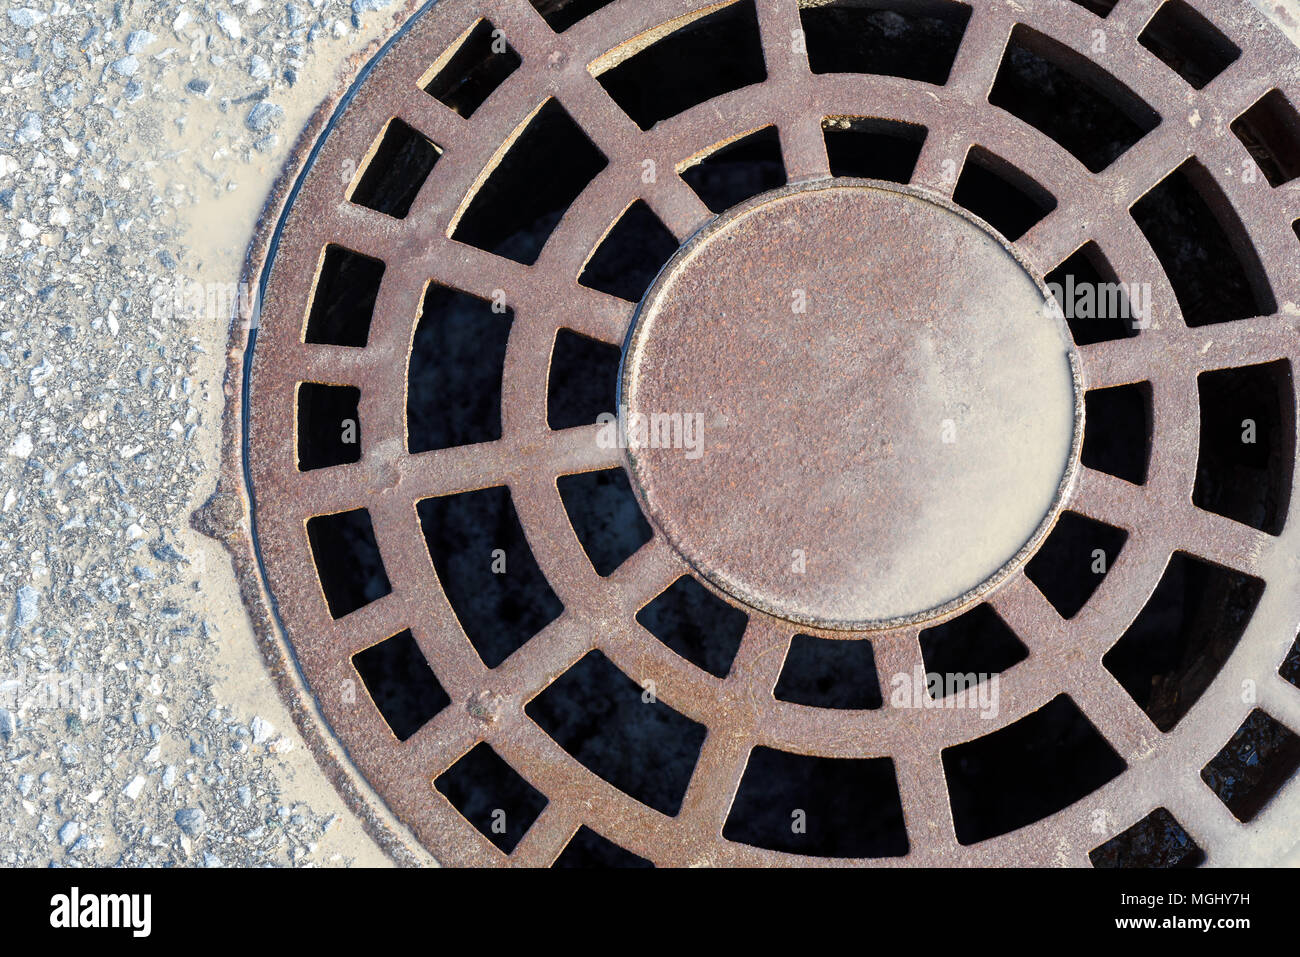 Cast iron metal rain manhole cover in tarmac with fresh mud stained rain water surrounding the entrance grills of this heavy entrance lid Stock Photo